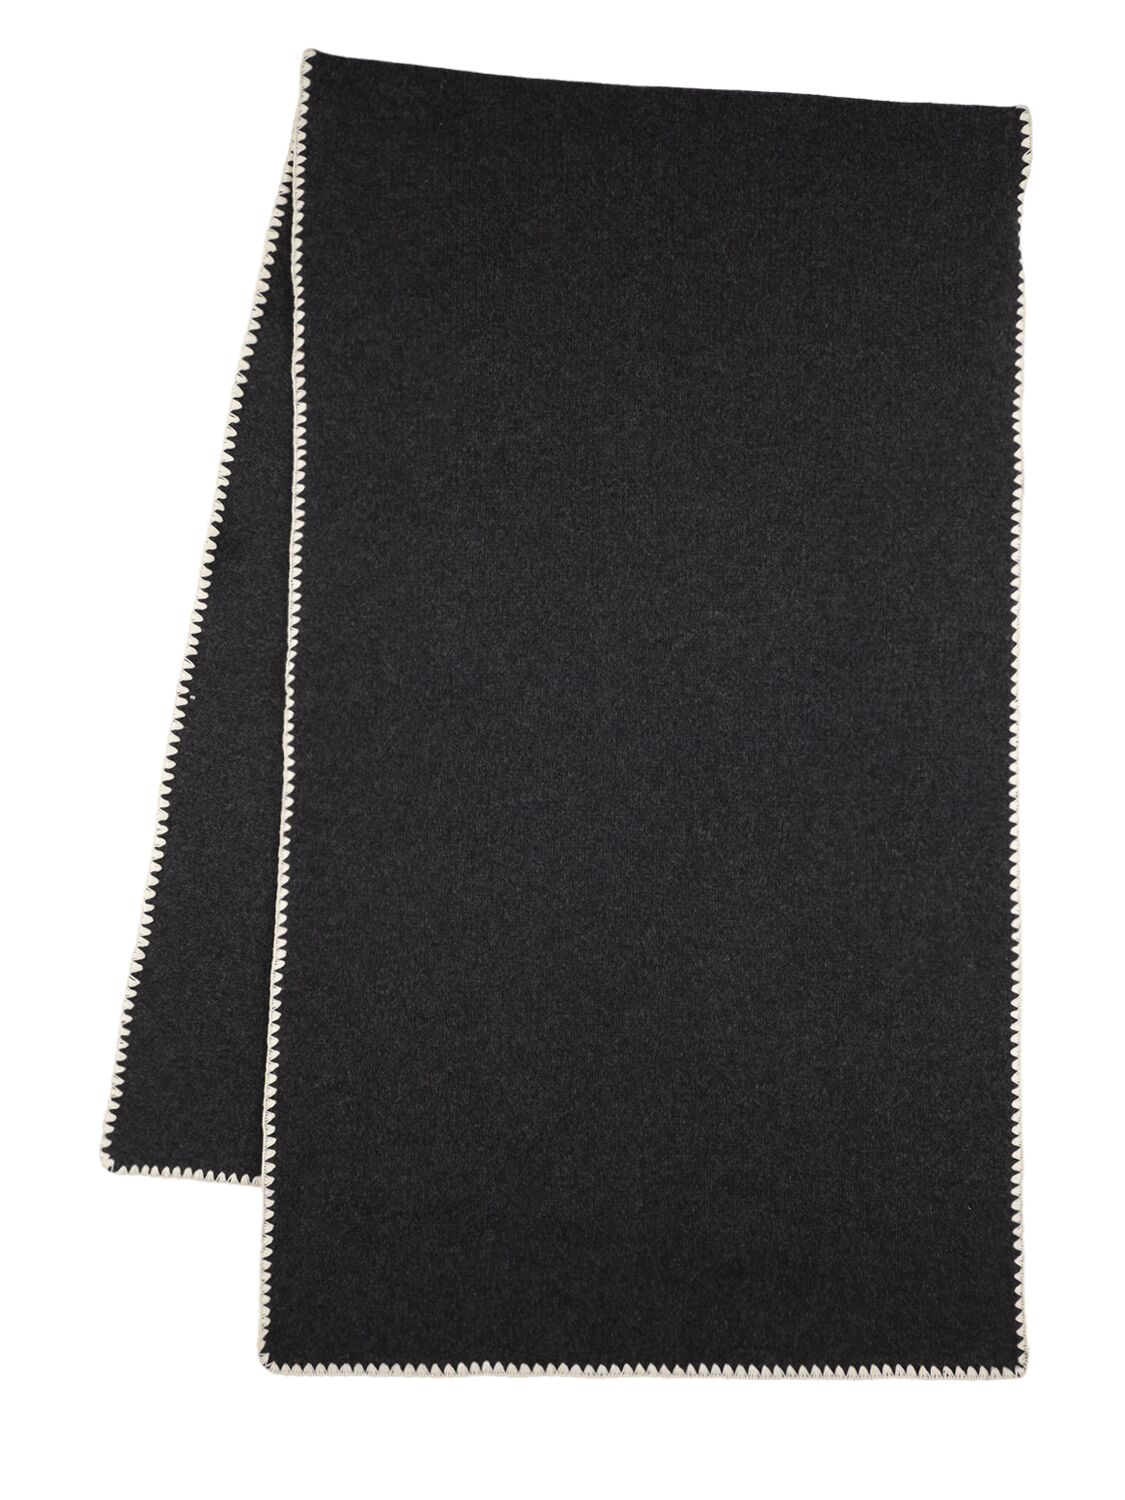 Image of Embroidered Wool & Cashmere Scarf